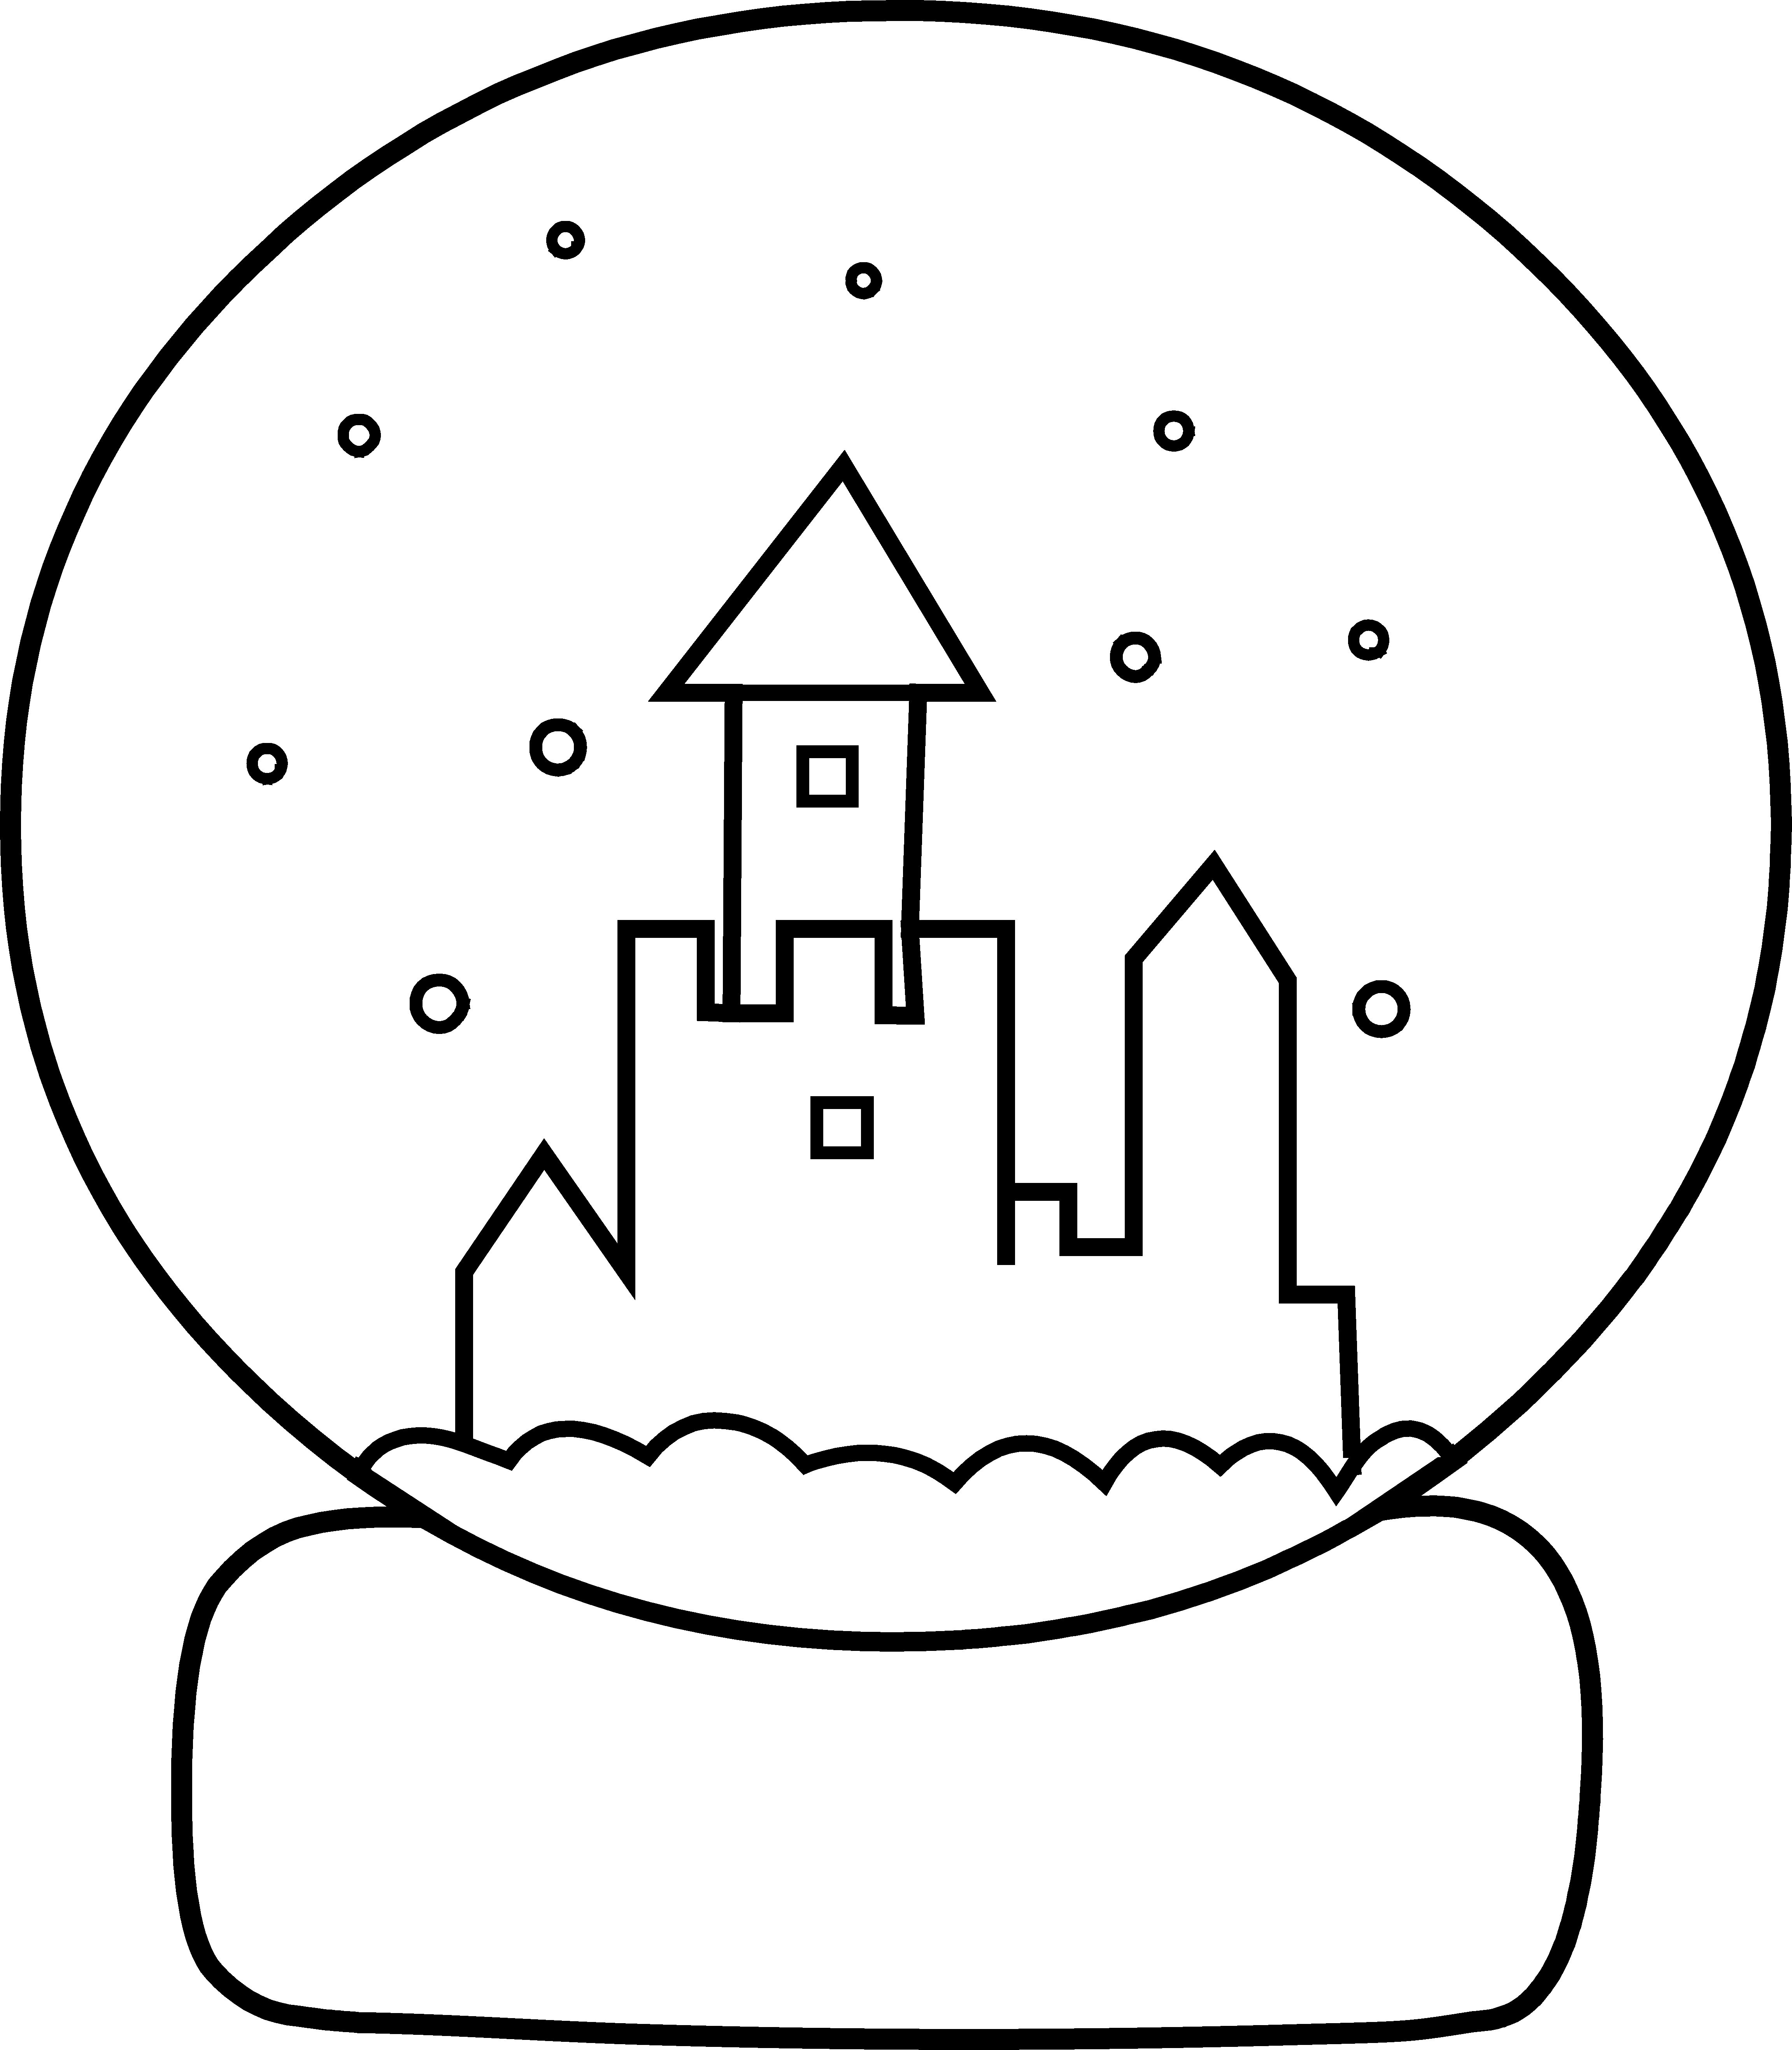 Holidays clipart snowglobe. Cute snow globe coloring